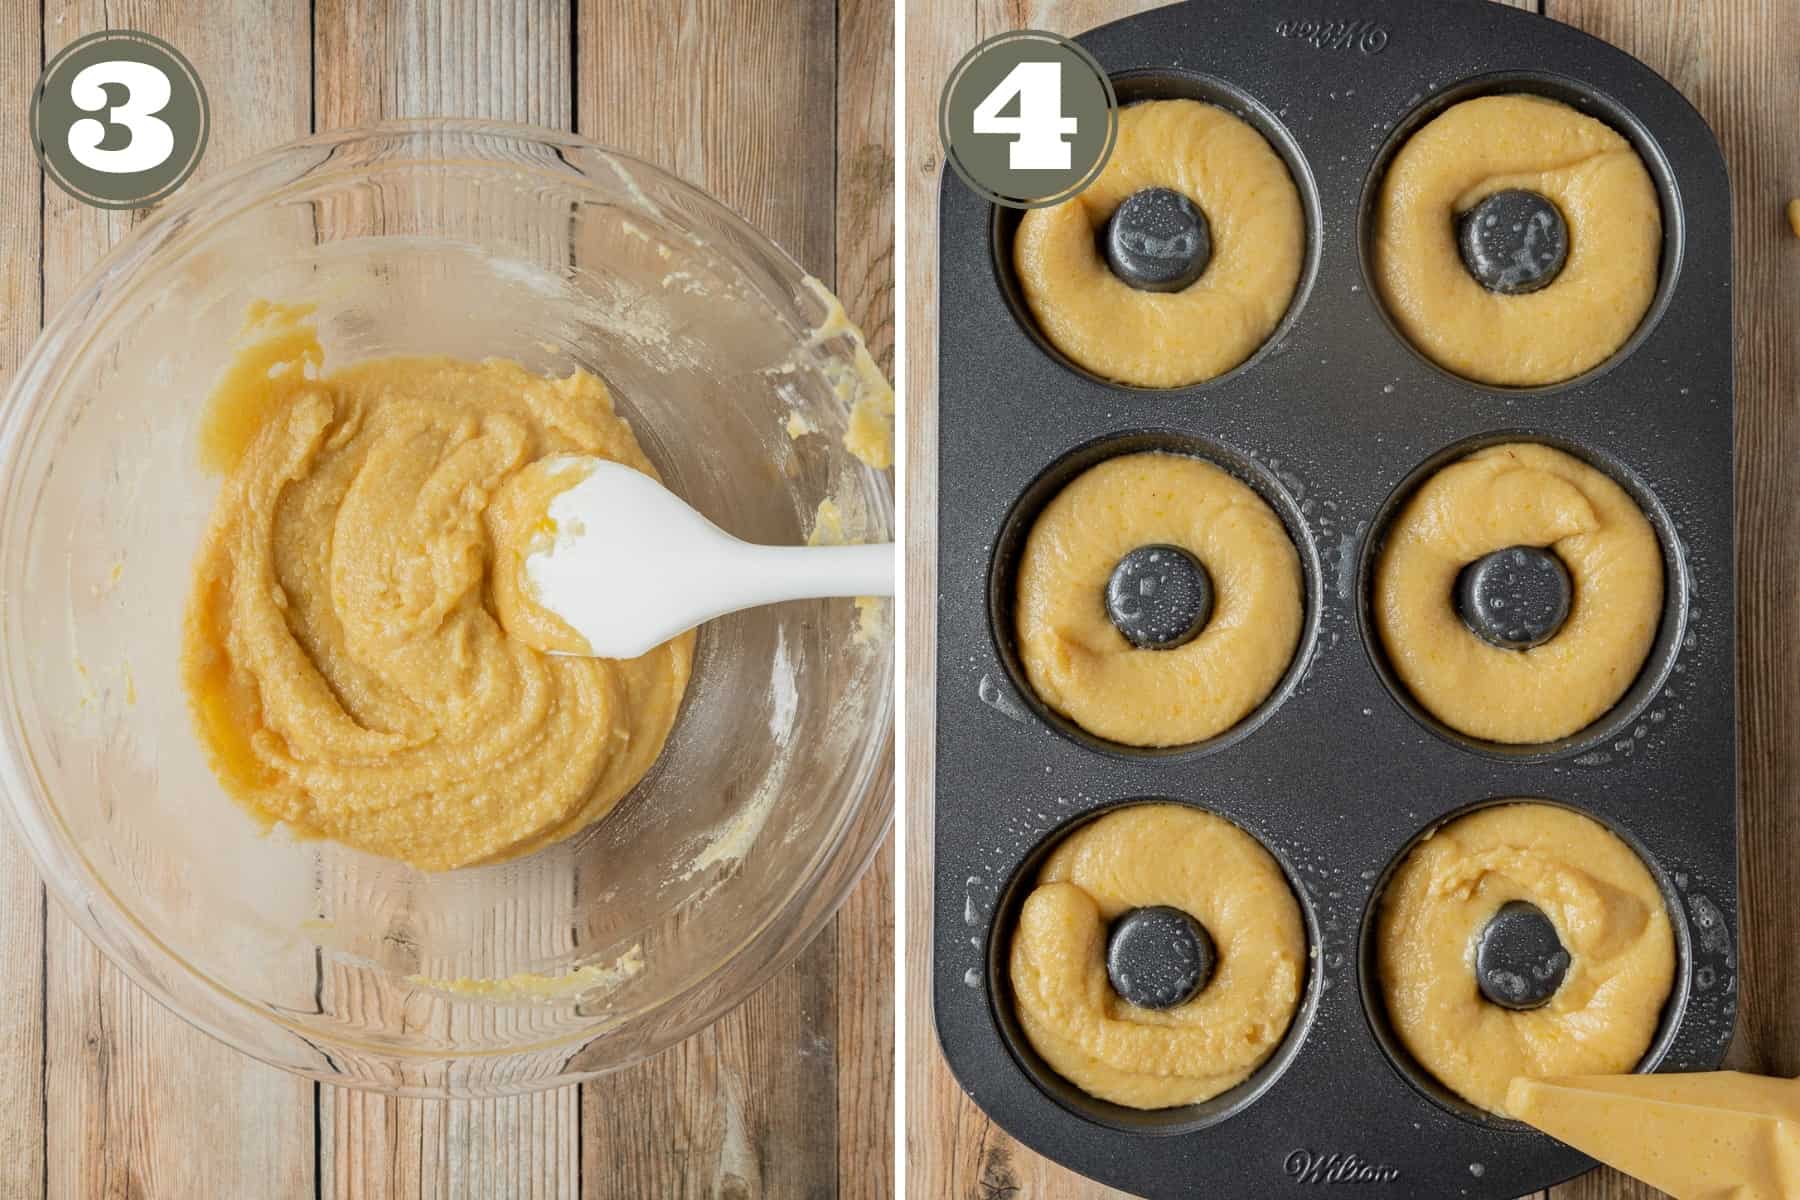 Side by side process shots including donut batter in a bowl and donut batter piped into a donut pan.